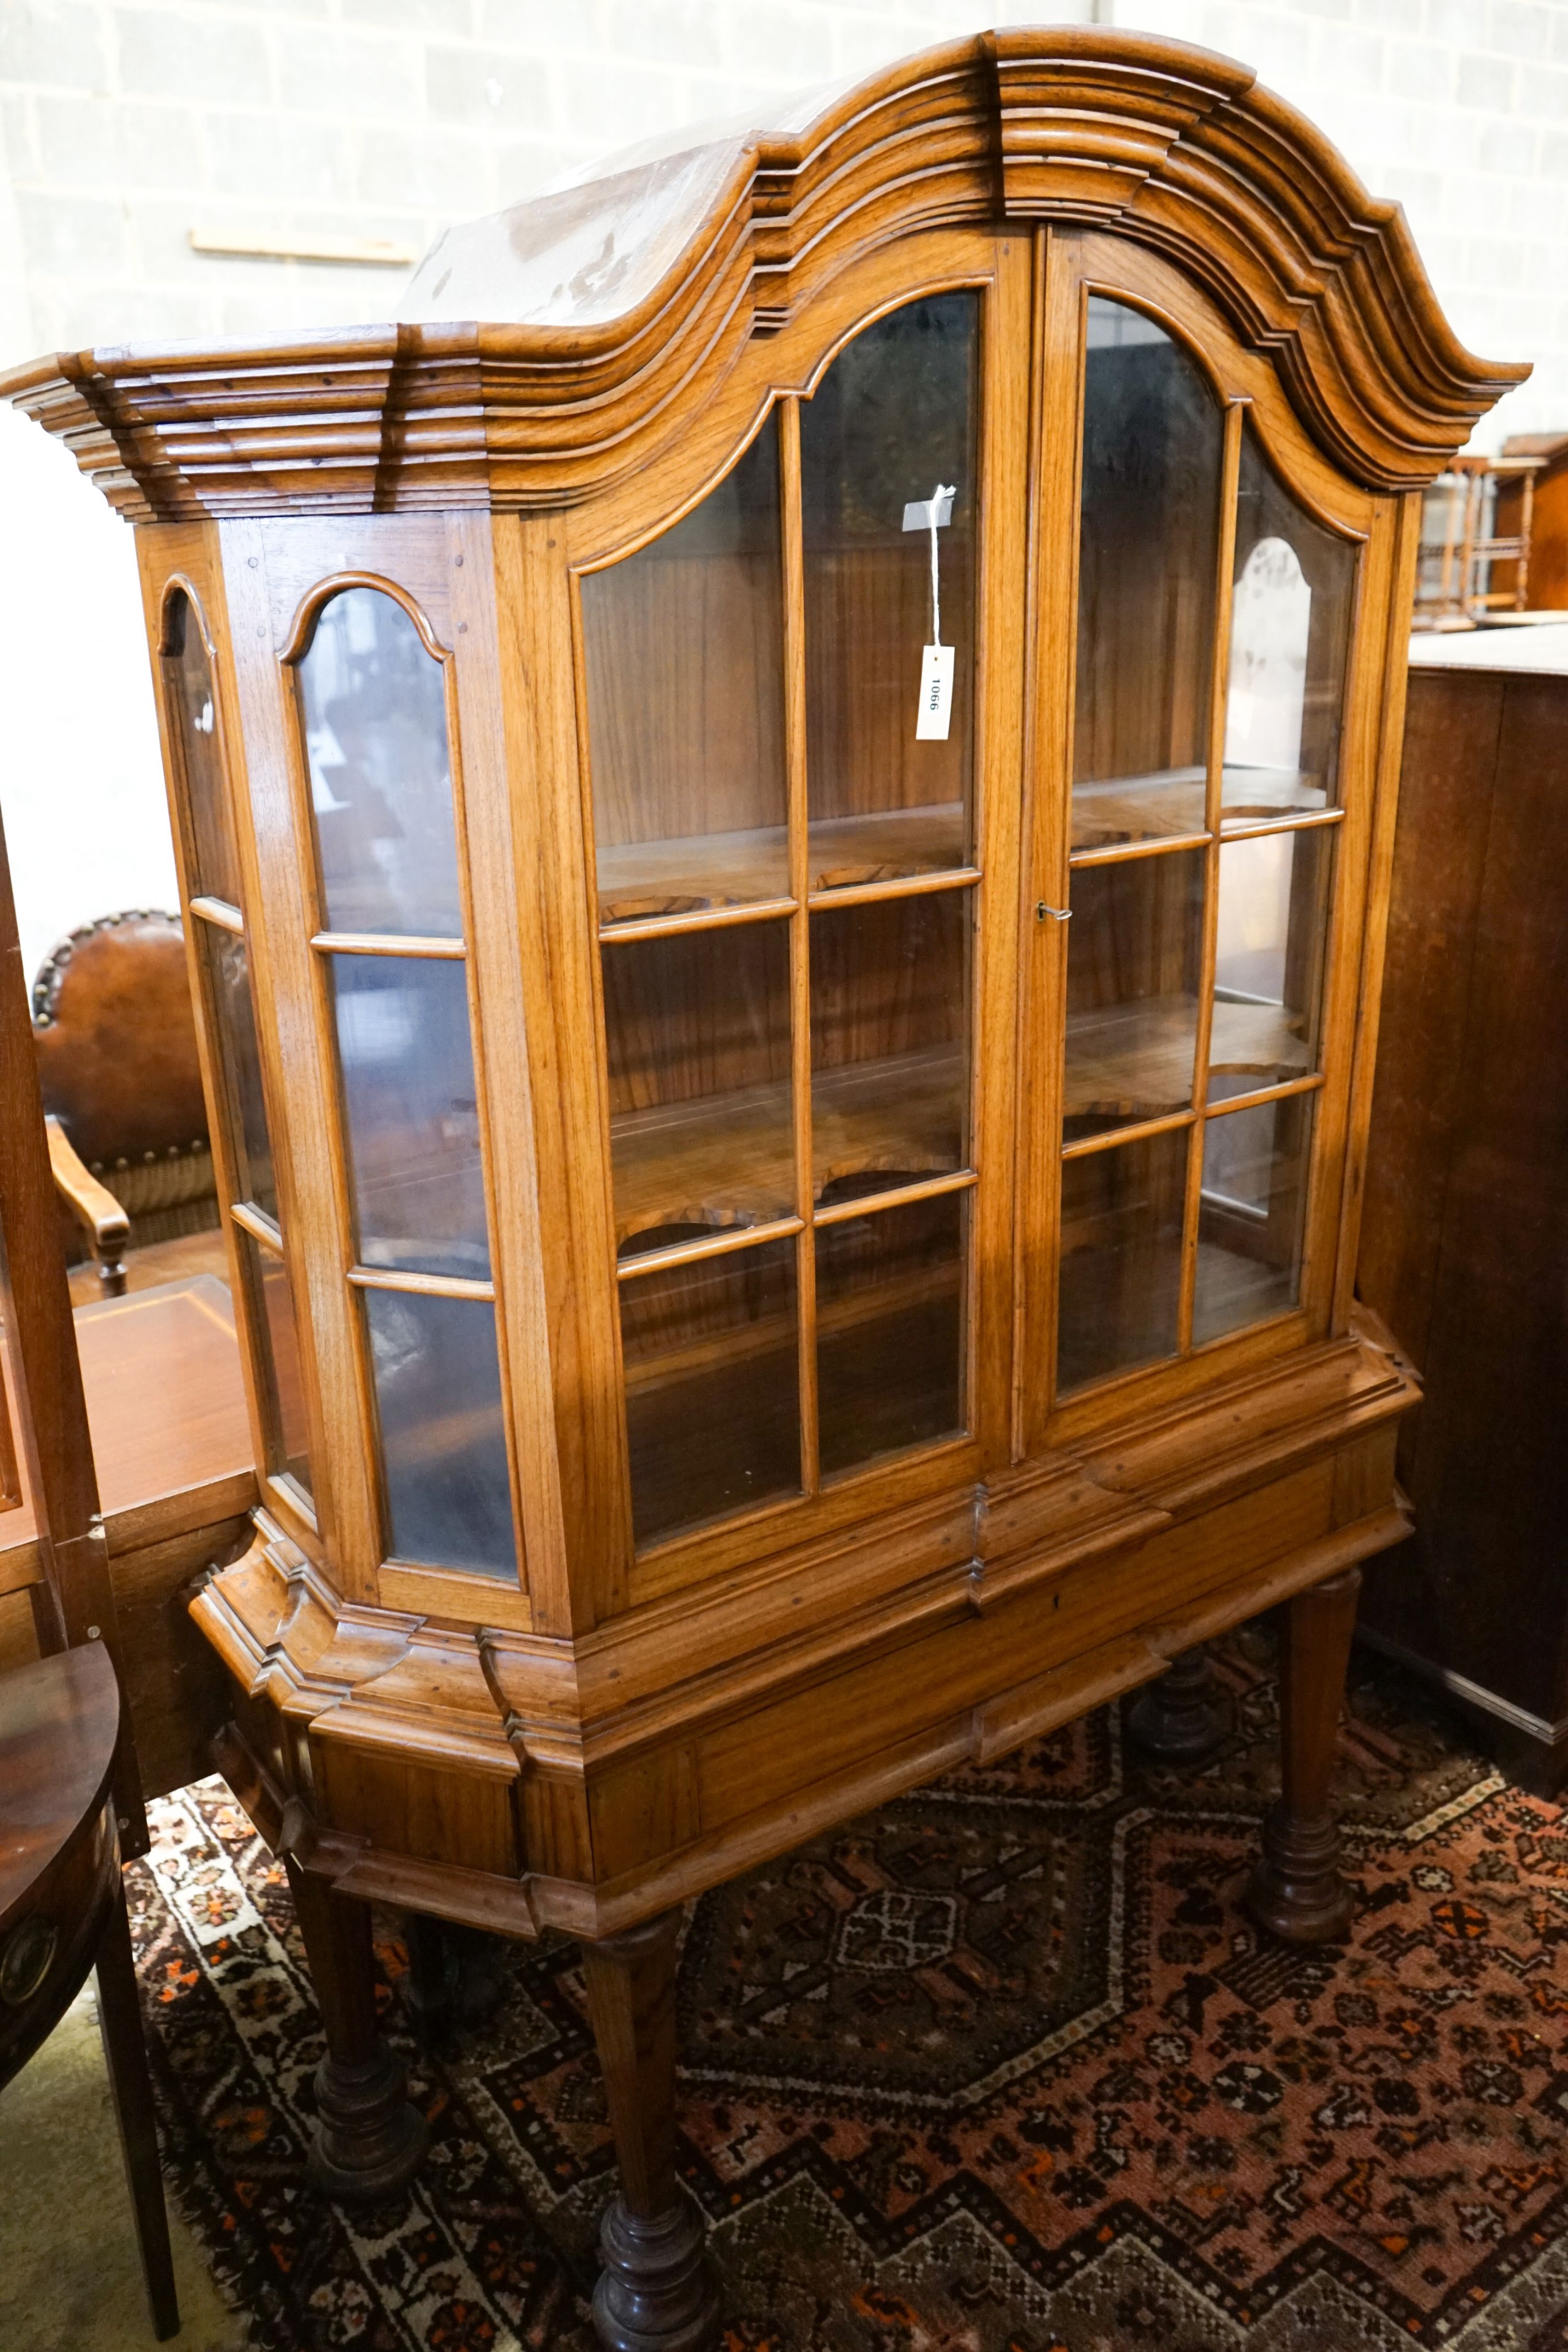 An 18th century style Dutch walnut display case, with double-arched moulded cornice over a pair of astragal-glazed panelled doors, frieze drawer and base with octagonal tapered legs and lion feet, length 132cm, depth 46c